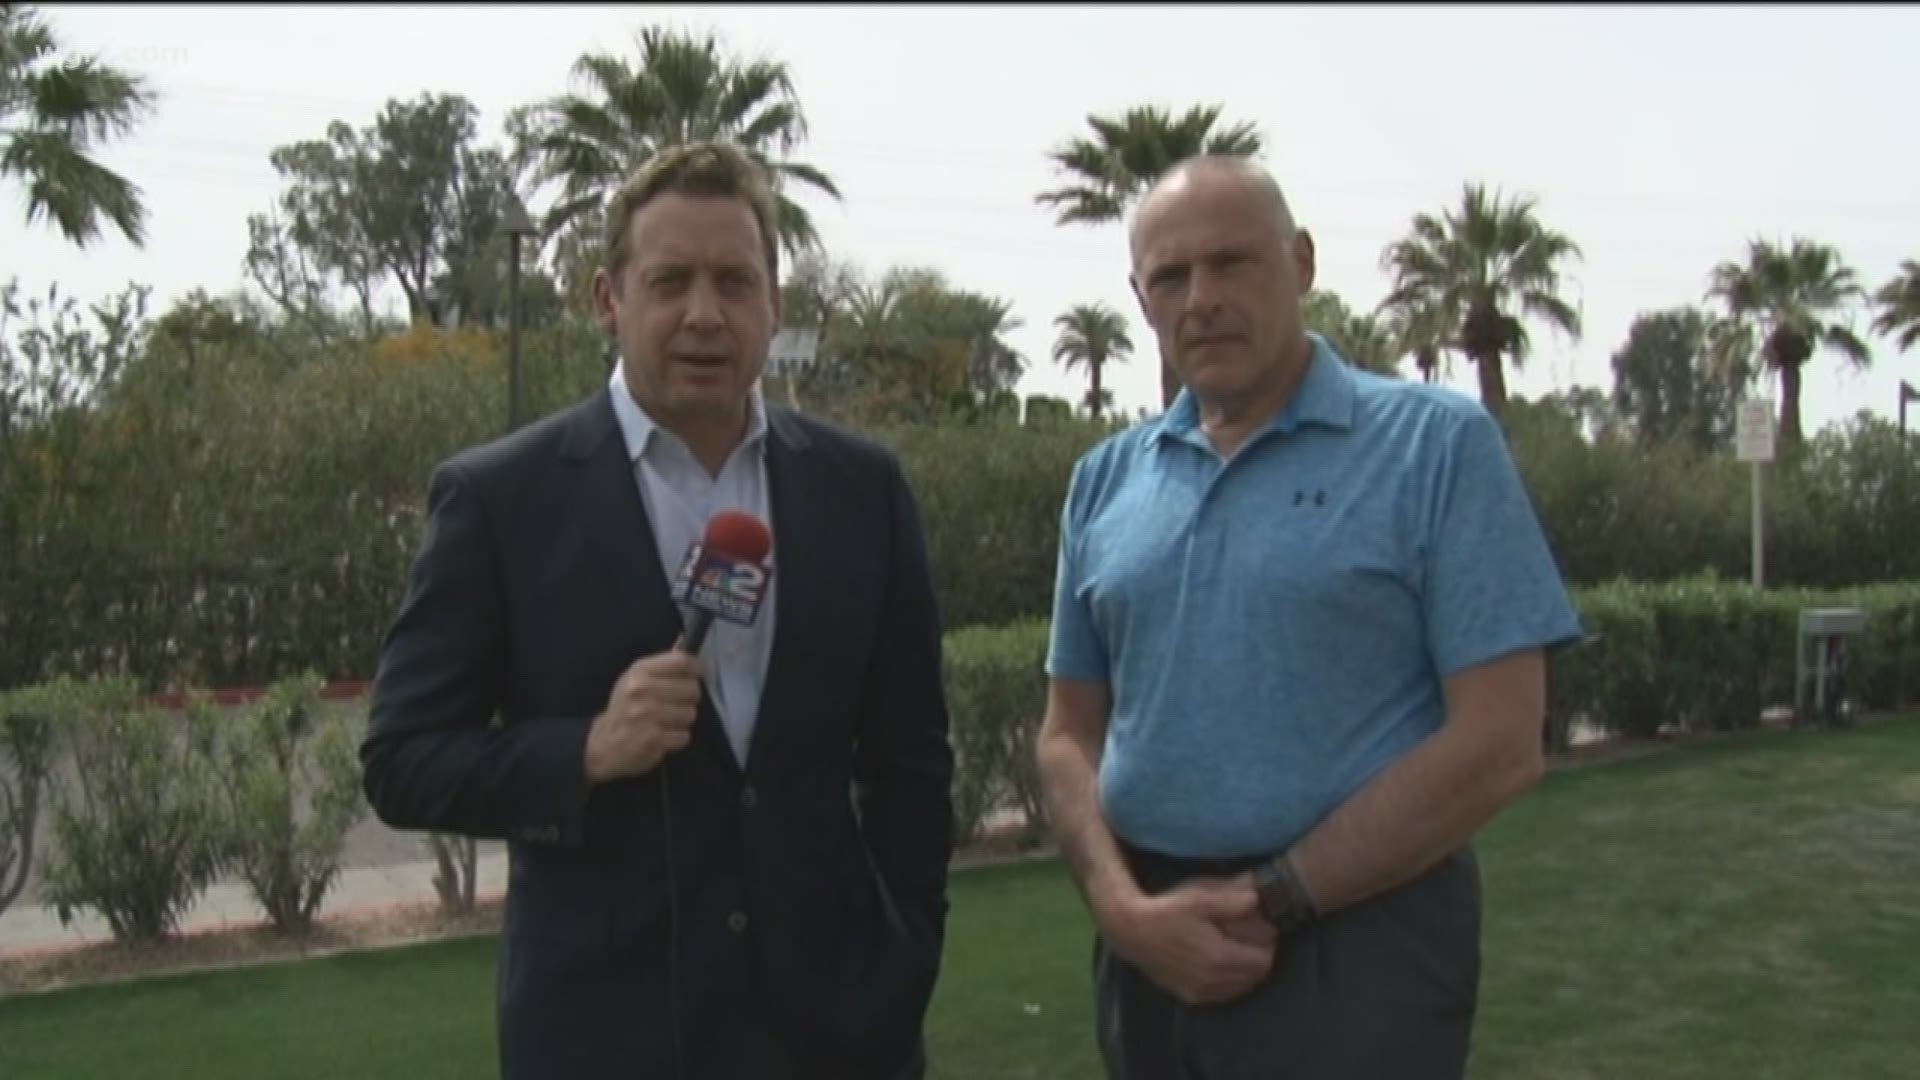 Plenty of things going on at the NFL owners meetings in Phoenix, Arizona.